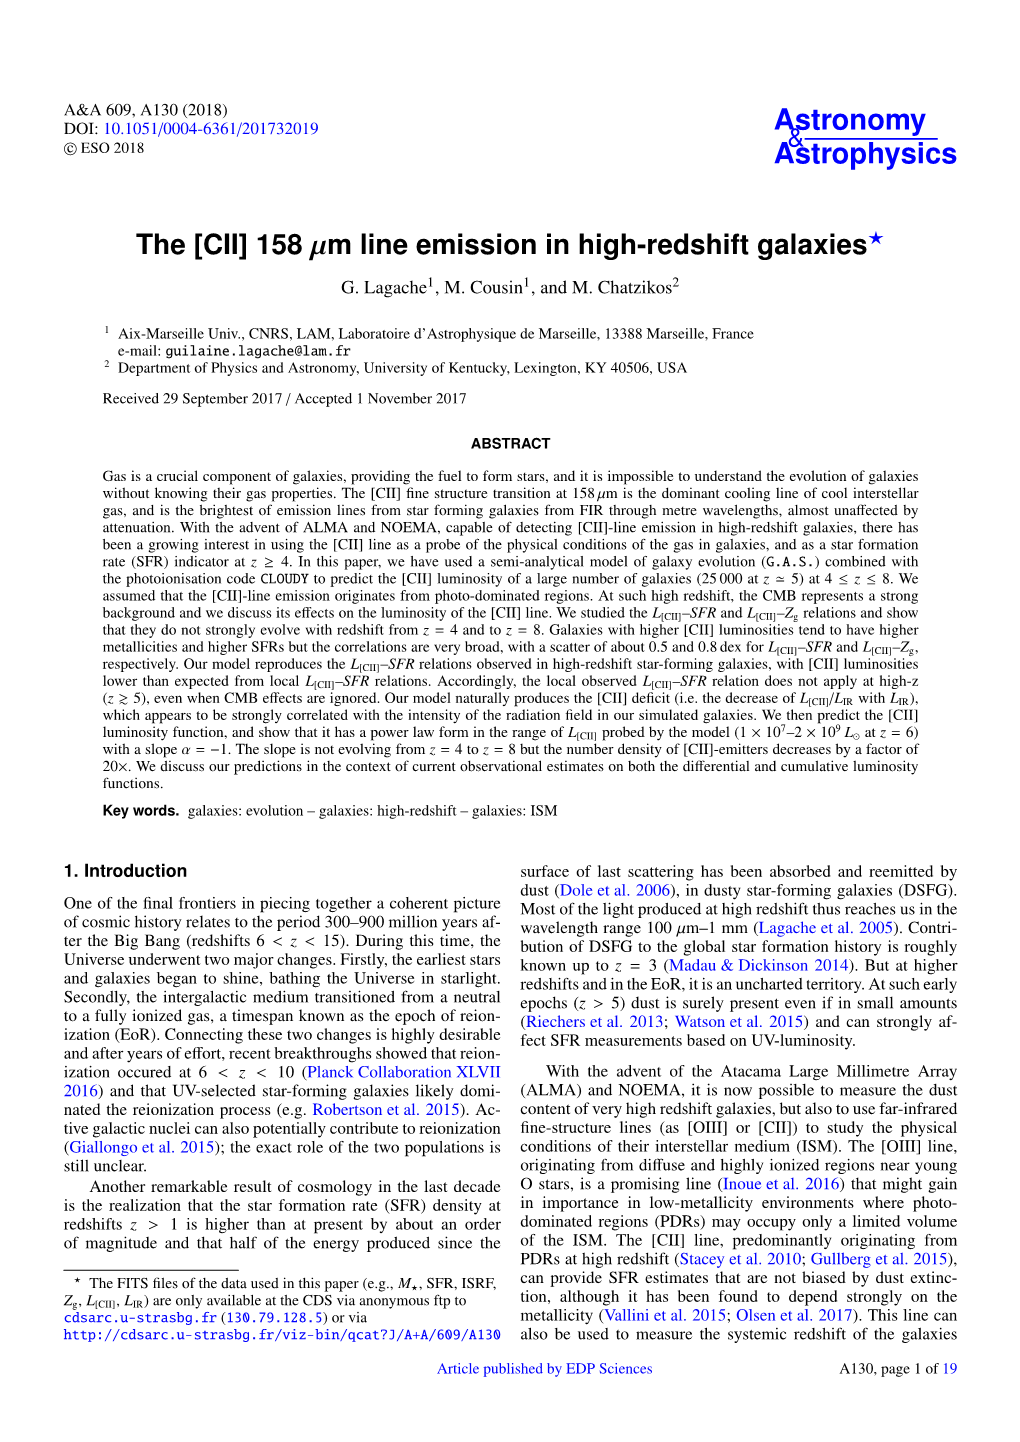 The [CII] 158 Μm Line Emission in High-Redshift Galaxies